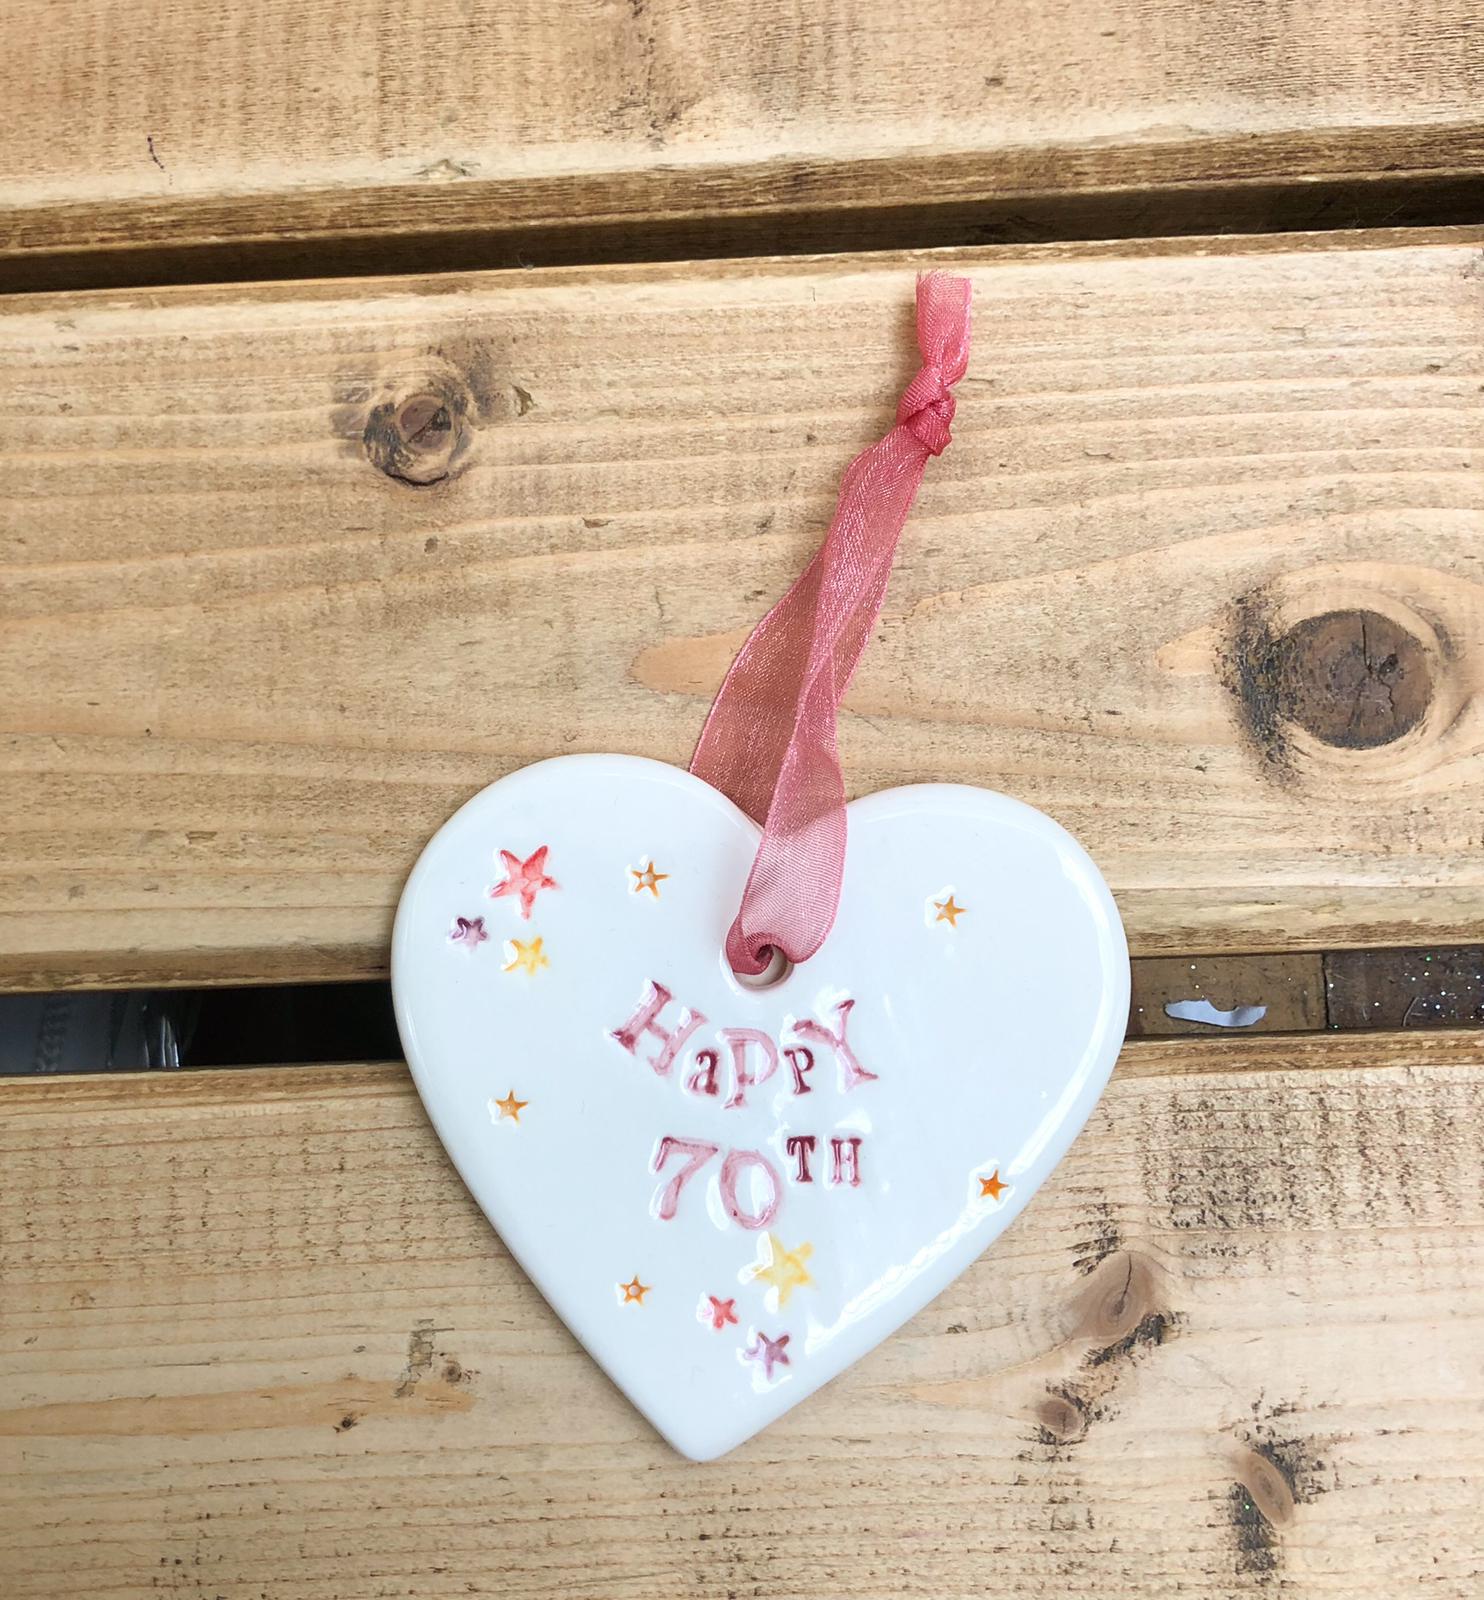 Hand painted ceramic heart featuring star design and the sentiment 'Happy 70th' Handmade in the UK using clay, glaze and paint sourced locally. Material: Ceramic